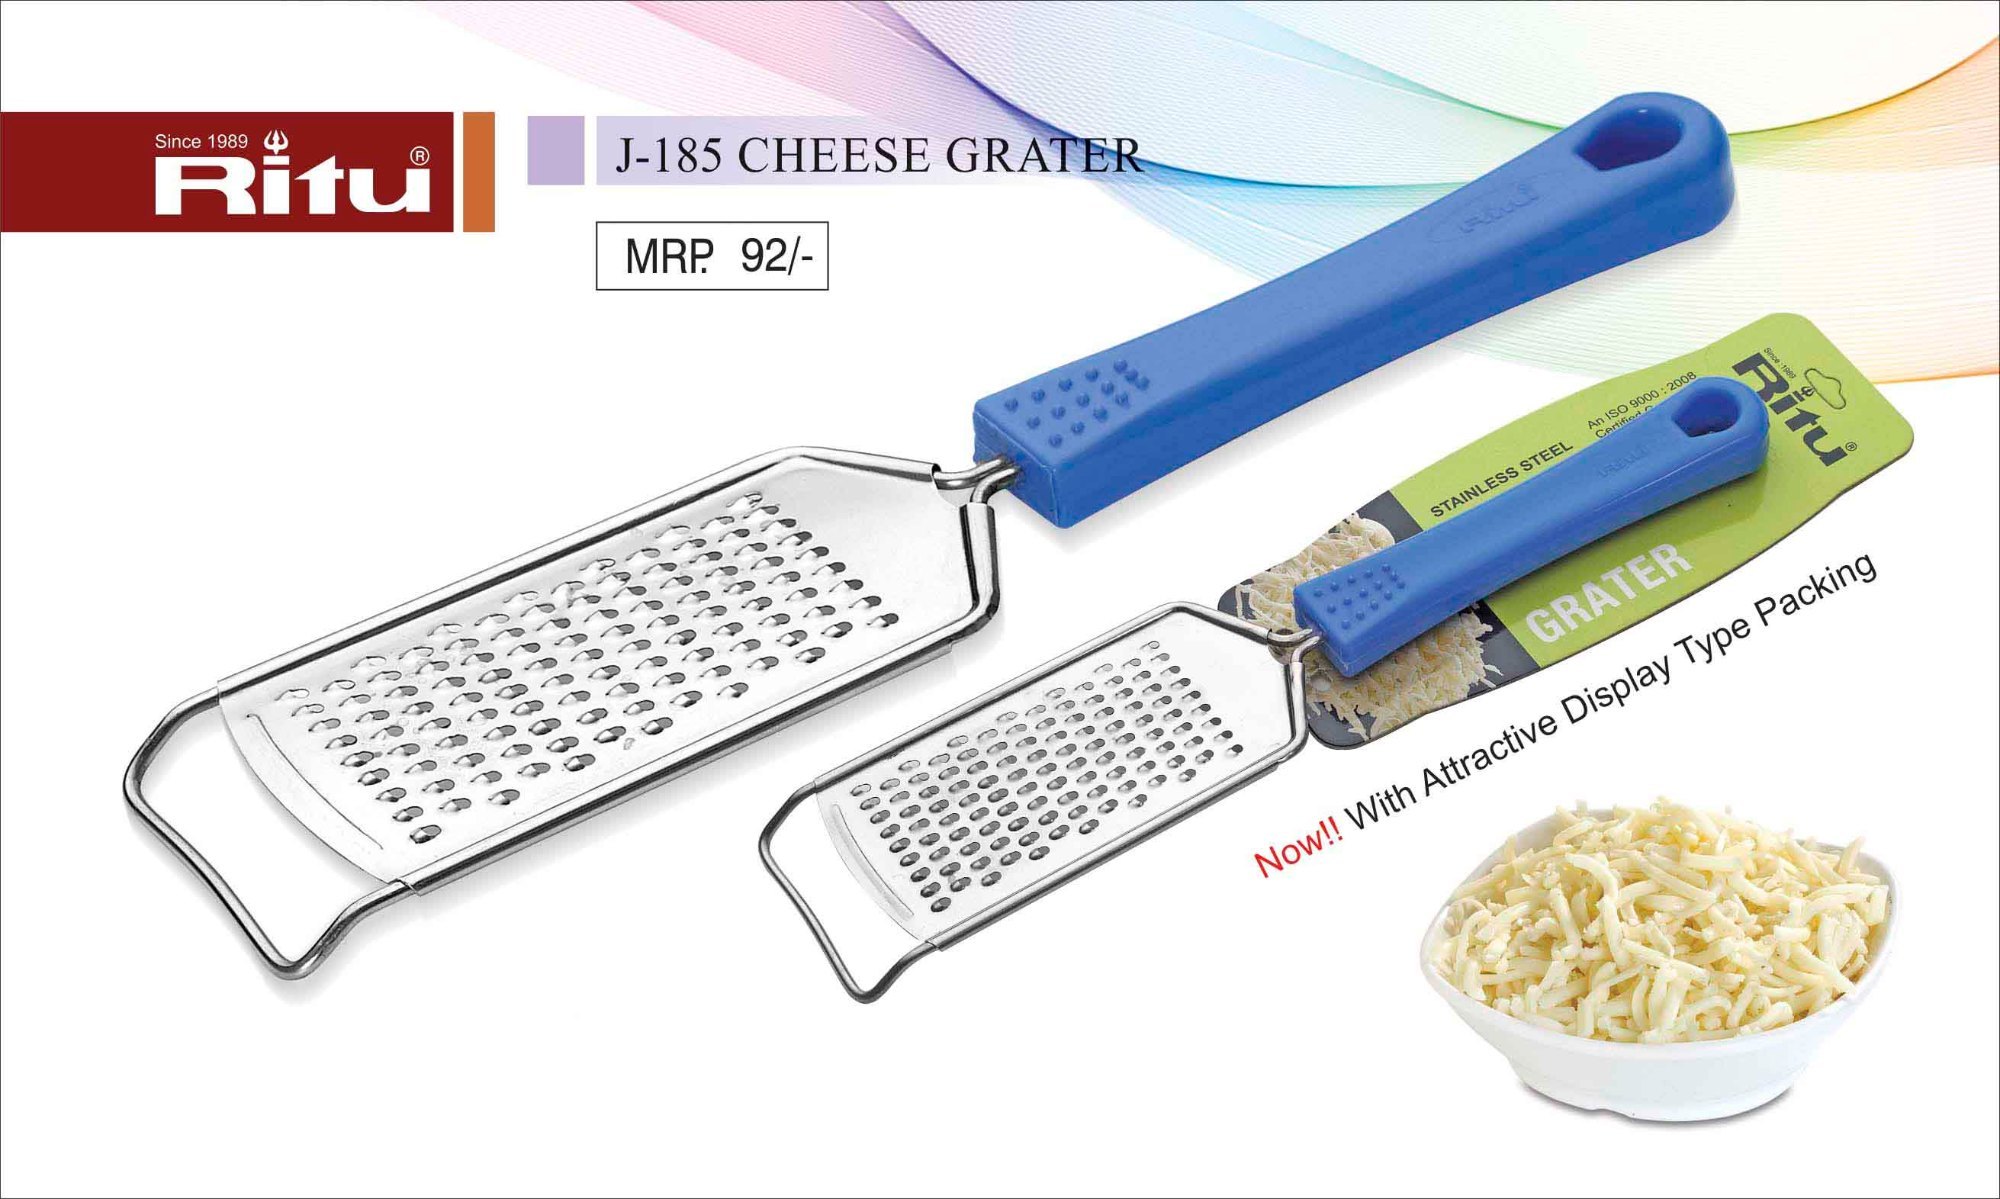 J-185 Cheese Grater